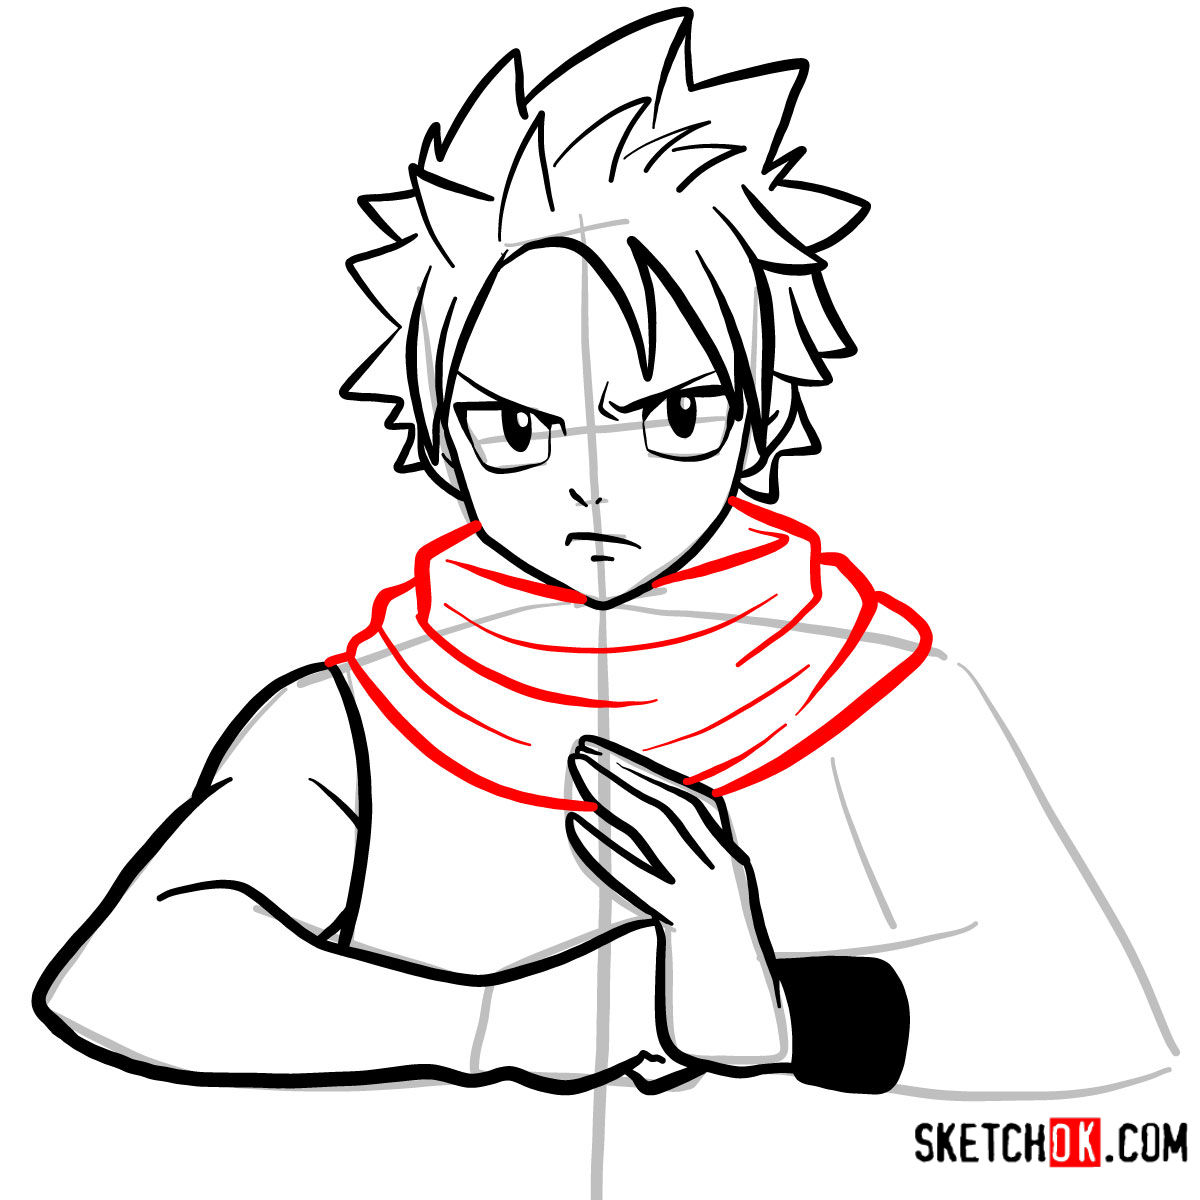 How to draw Natsu Dragneel's face | Fairy Tail - step 08